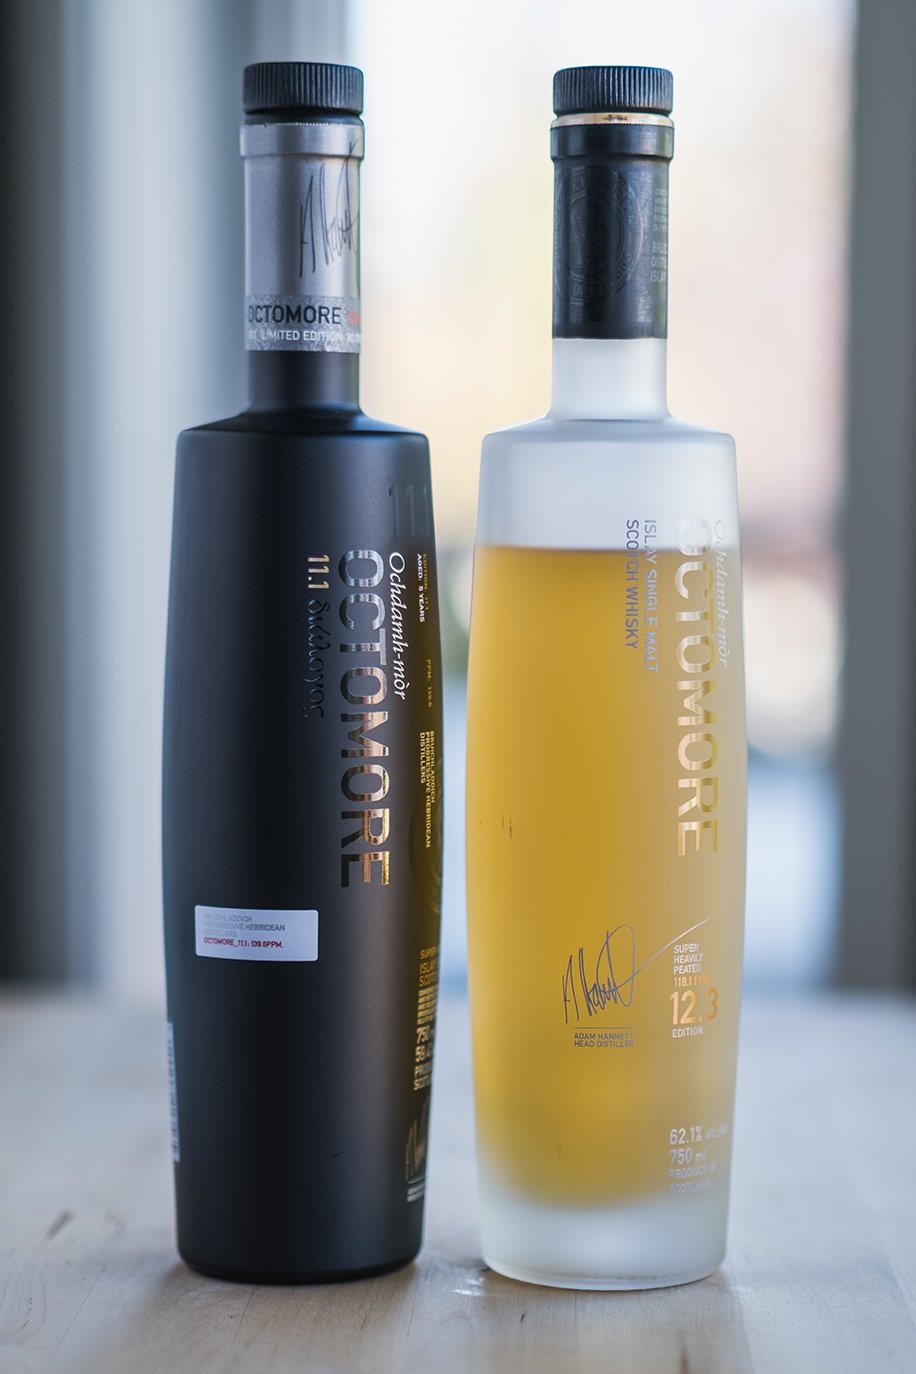 Octomore_11.1 and 12.3_01.jpg